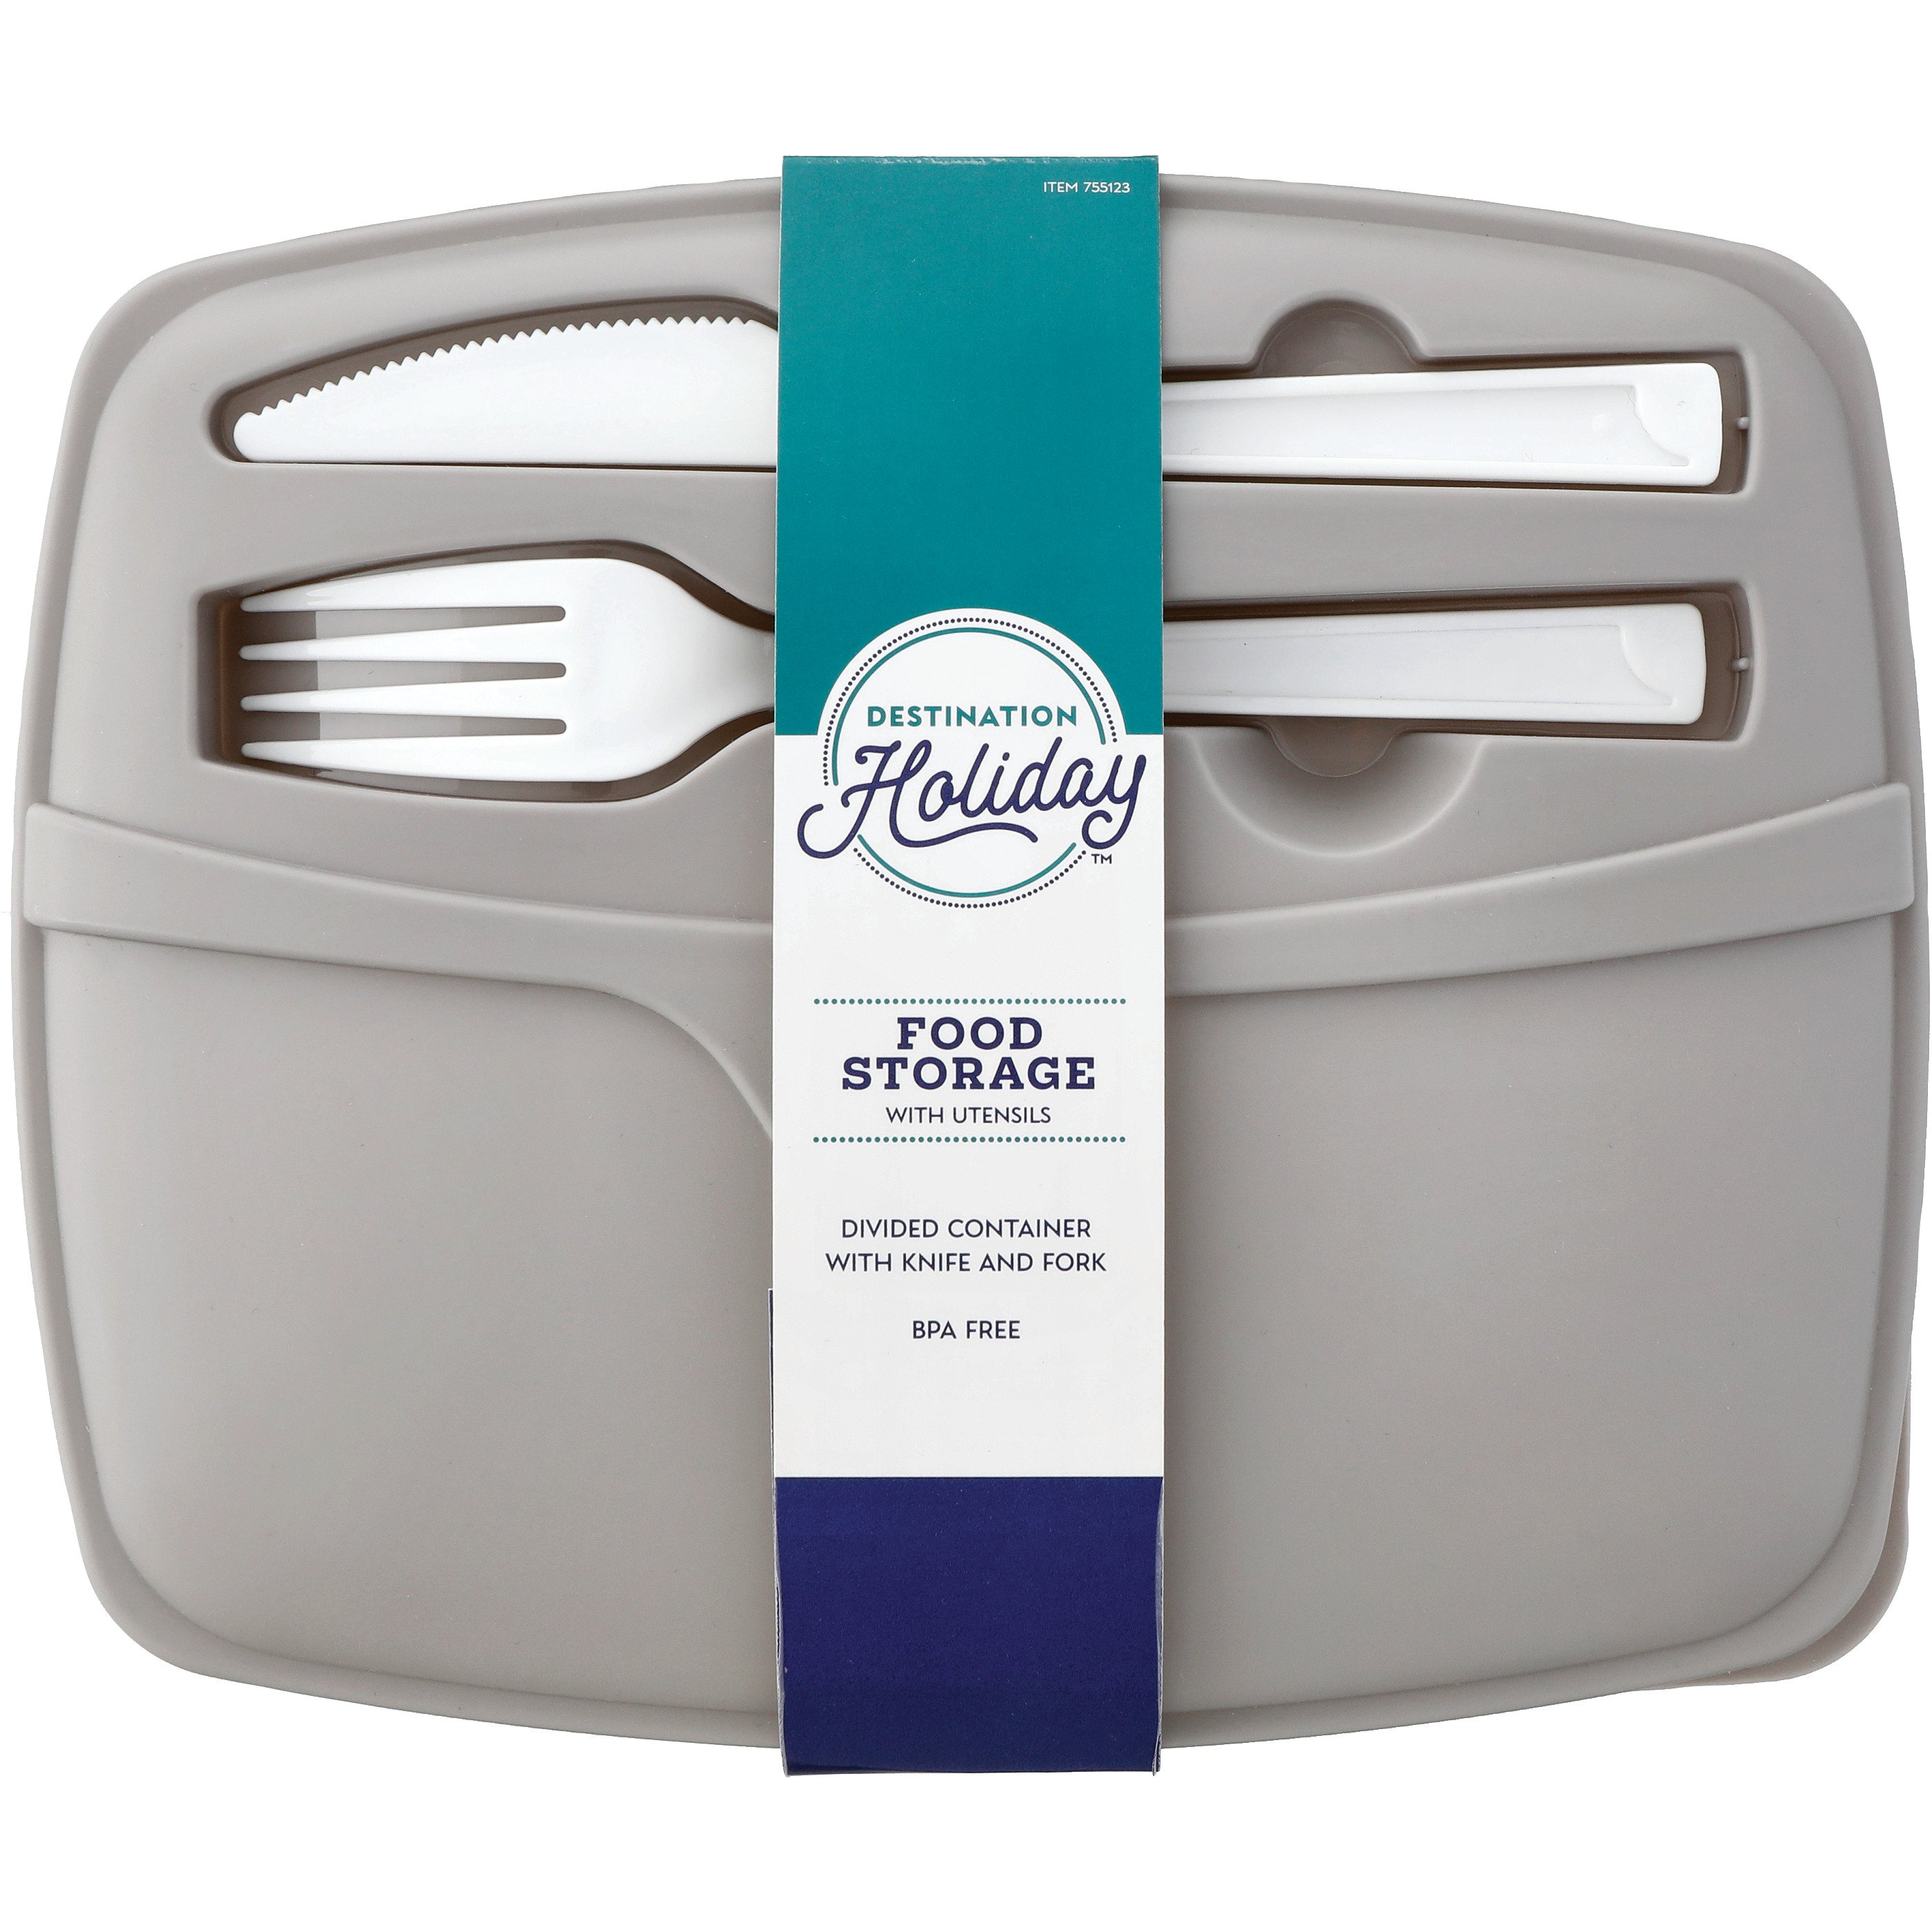 Destination Holiday Divided Food Storage Container with Utensils